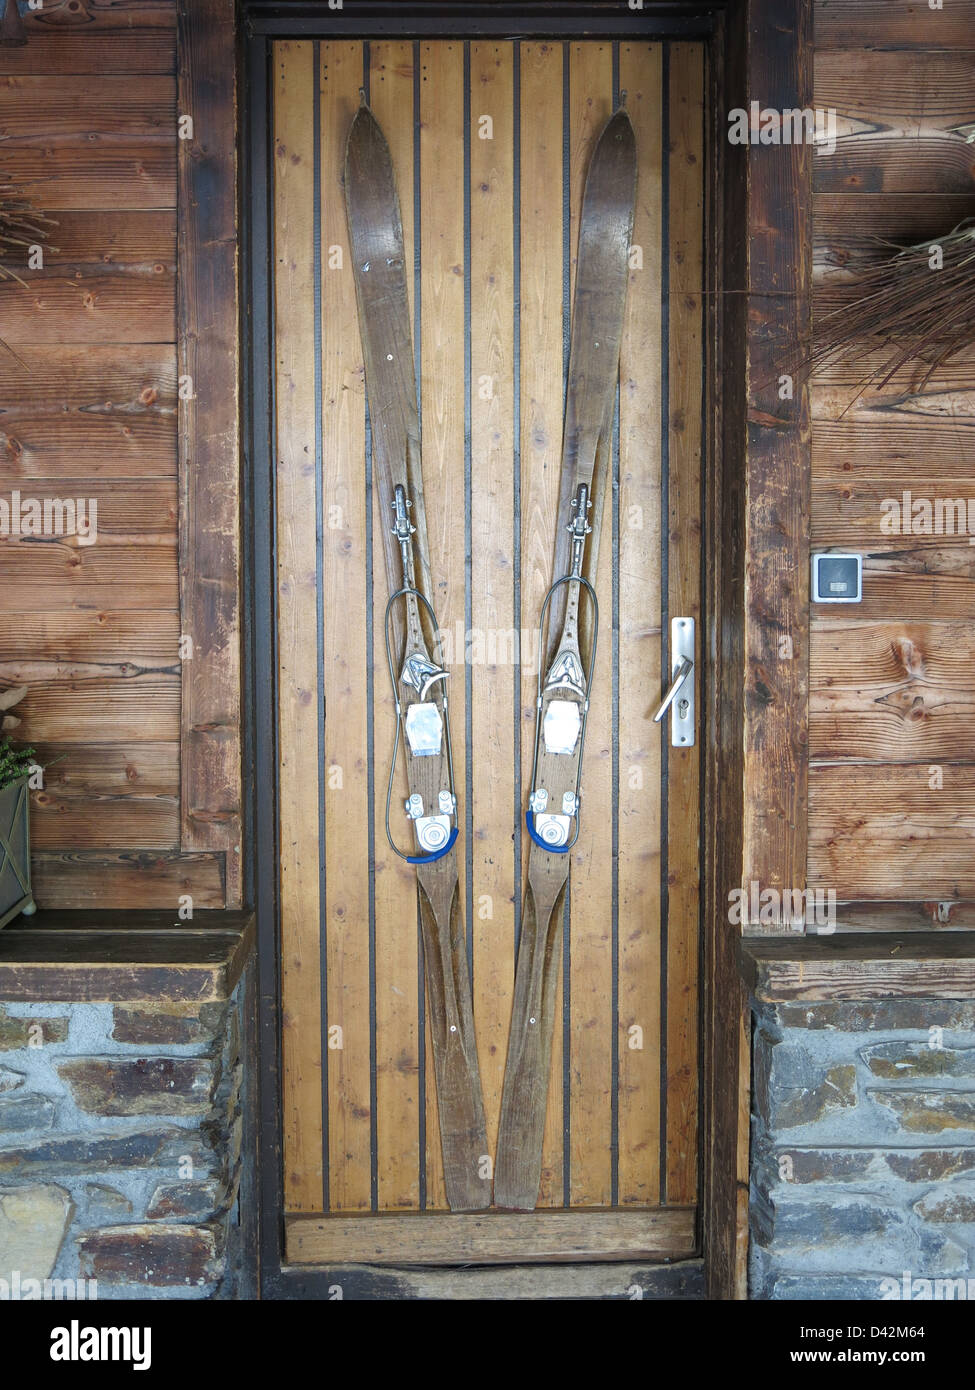 Old Fashioned Skis in Les Grands Montets, Argentiere. Chamonix Valley, The Alps, France. Stock Photo